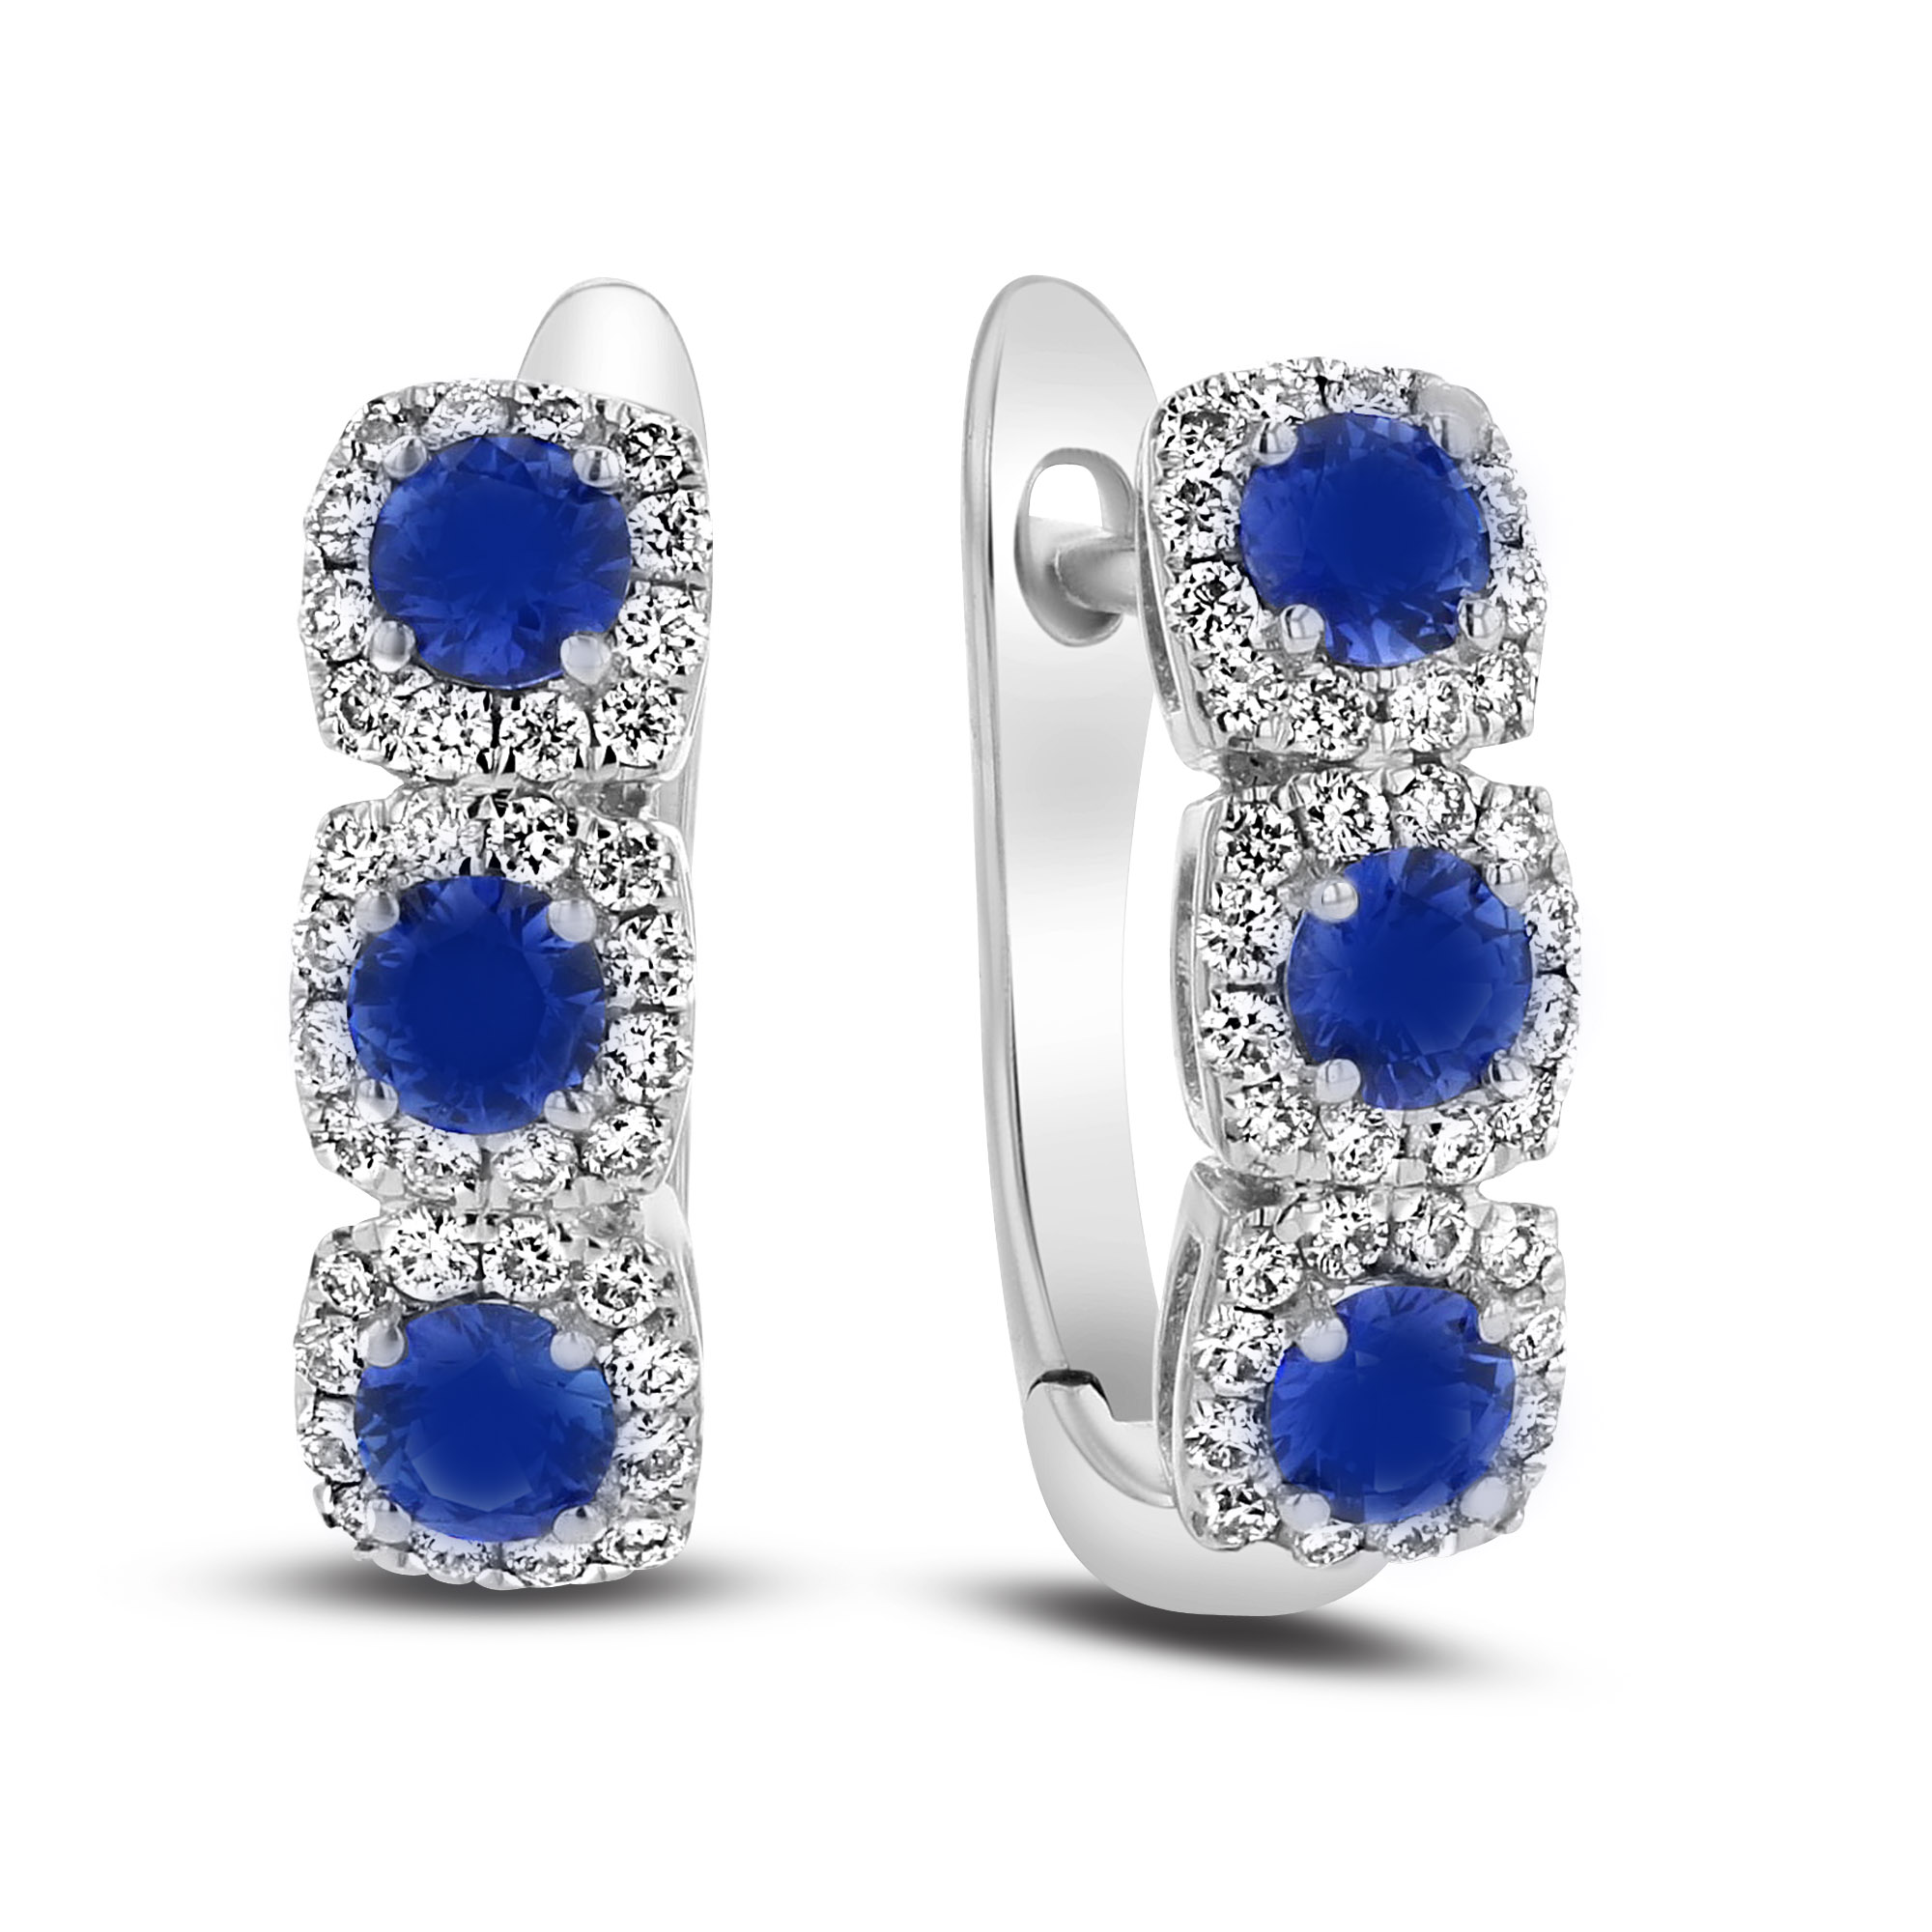 0.82ctw Diamond and Sapphire Hoop Earrings in 18k White Gold